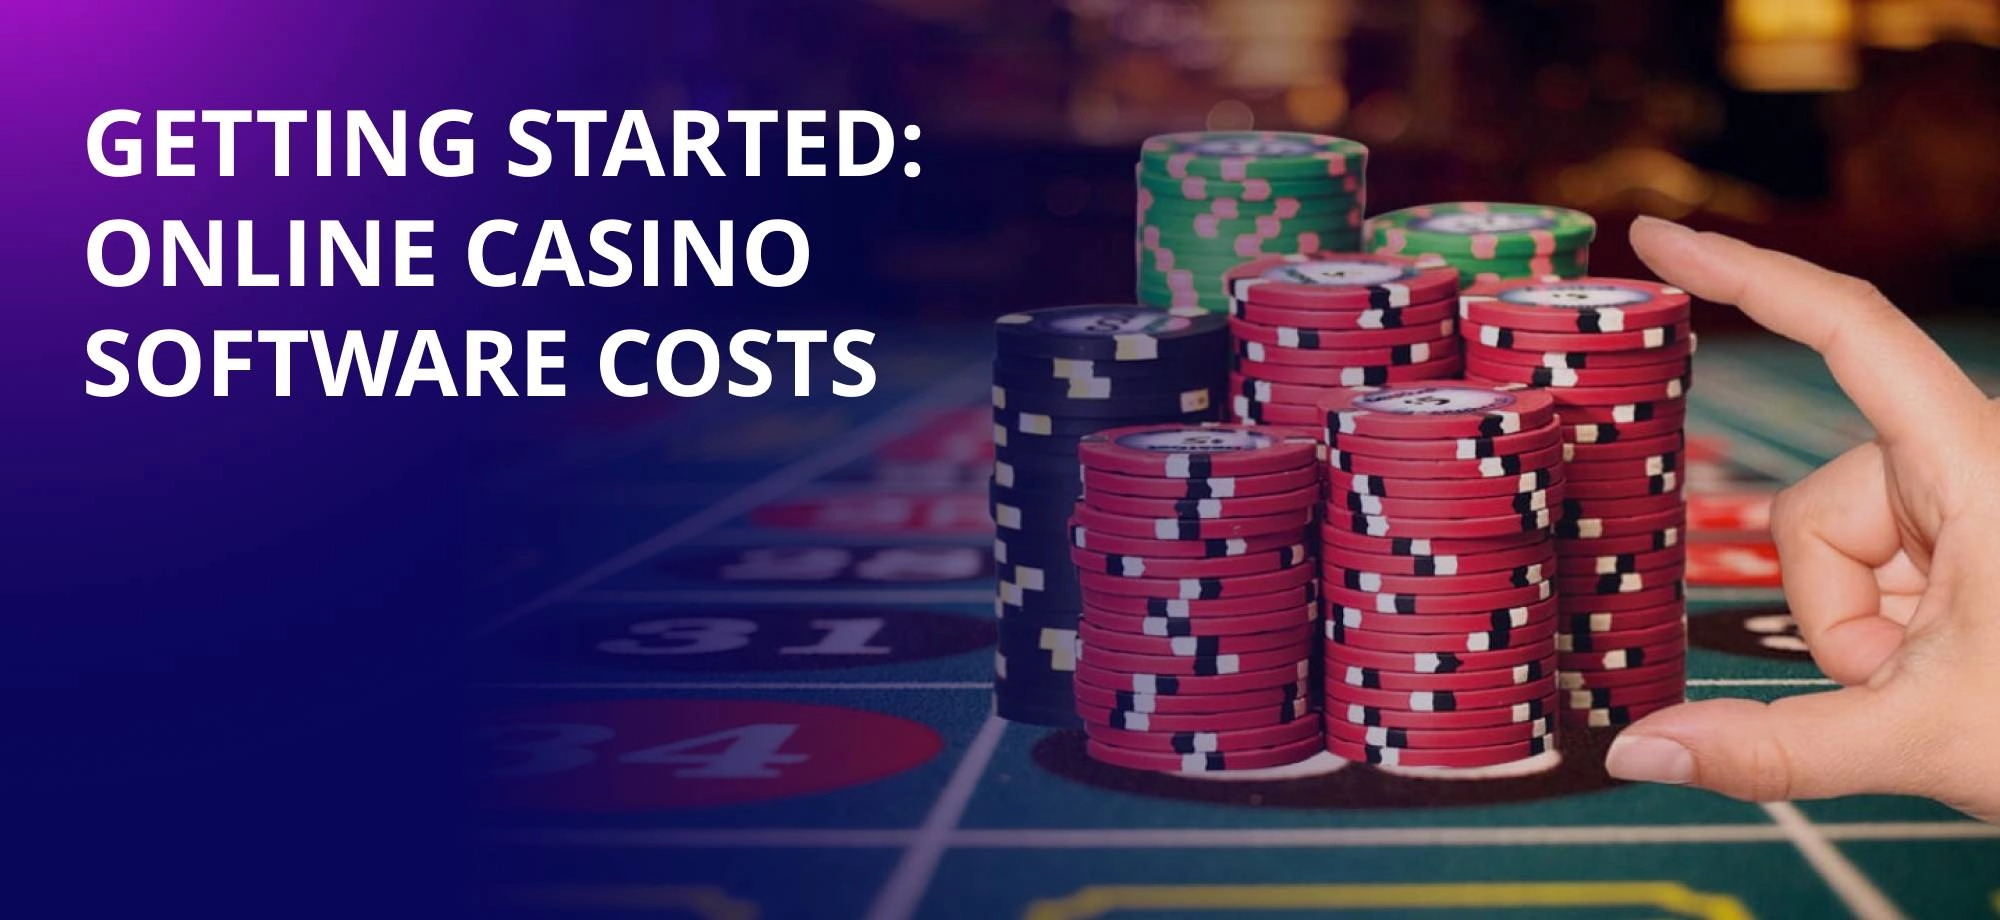 How much does online casino software cost